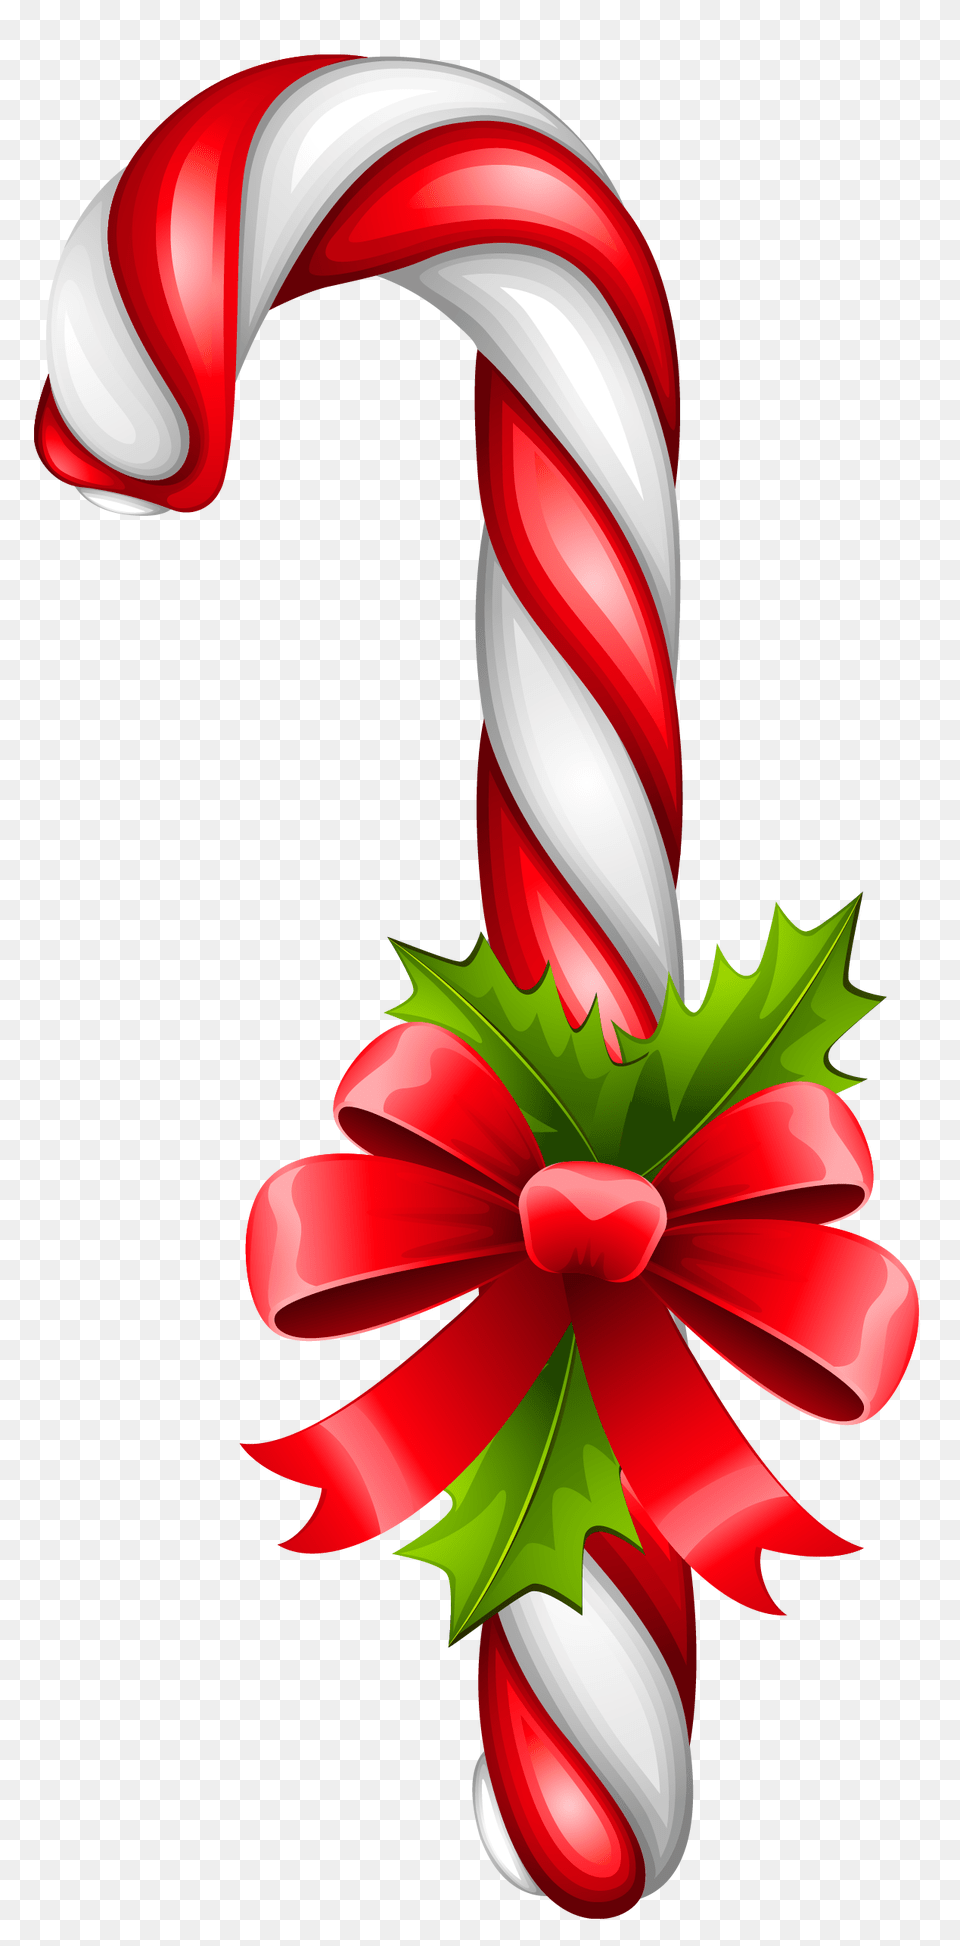 Christmas Candy, Food, Sweets, Dynamite, Weapon Png Image